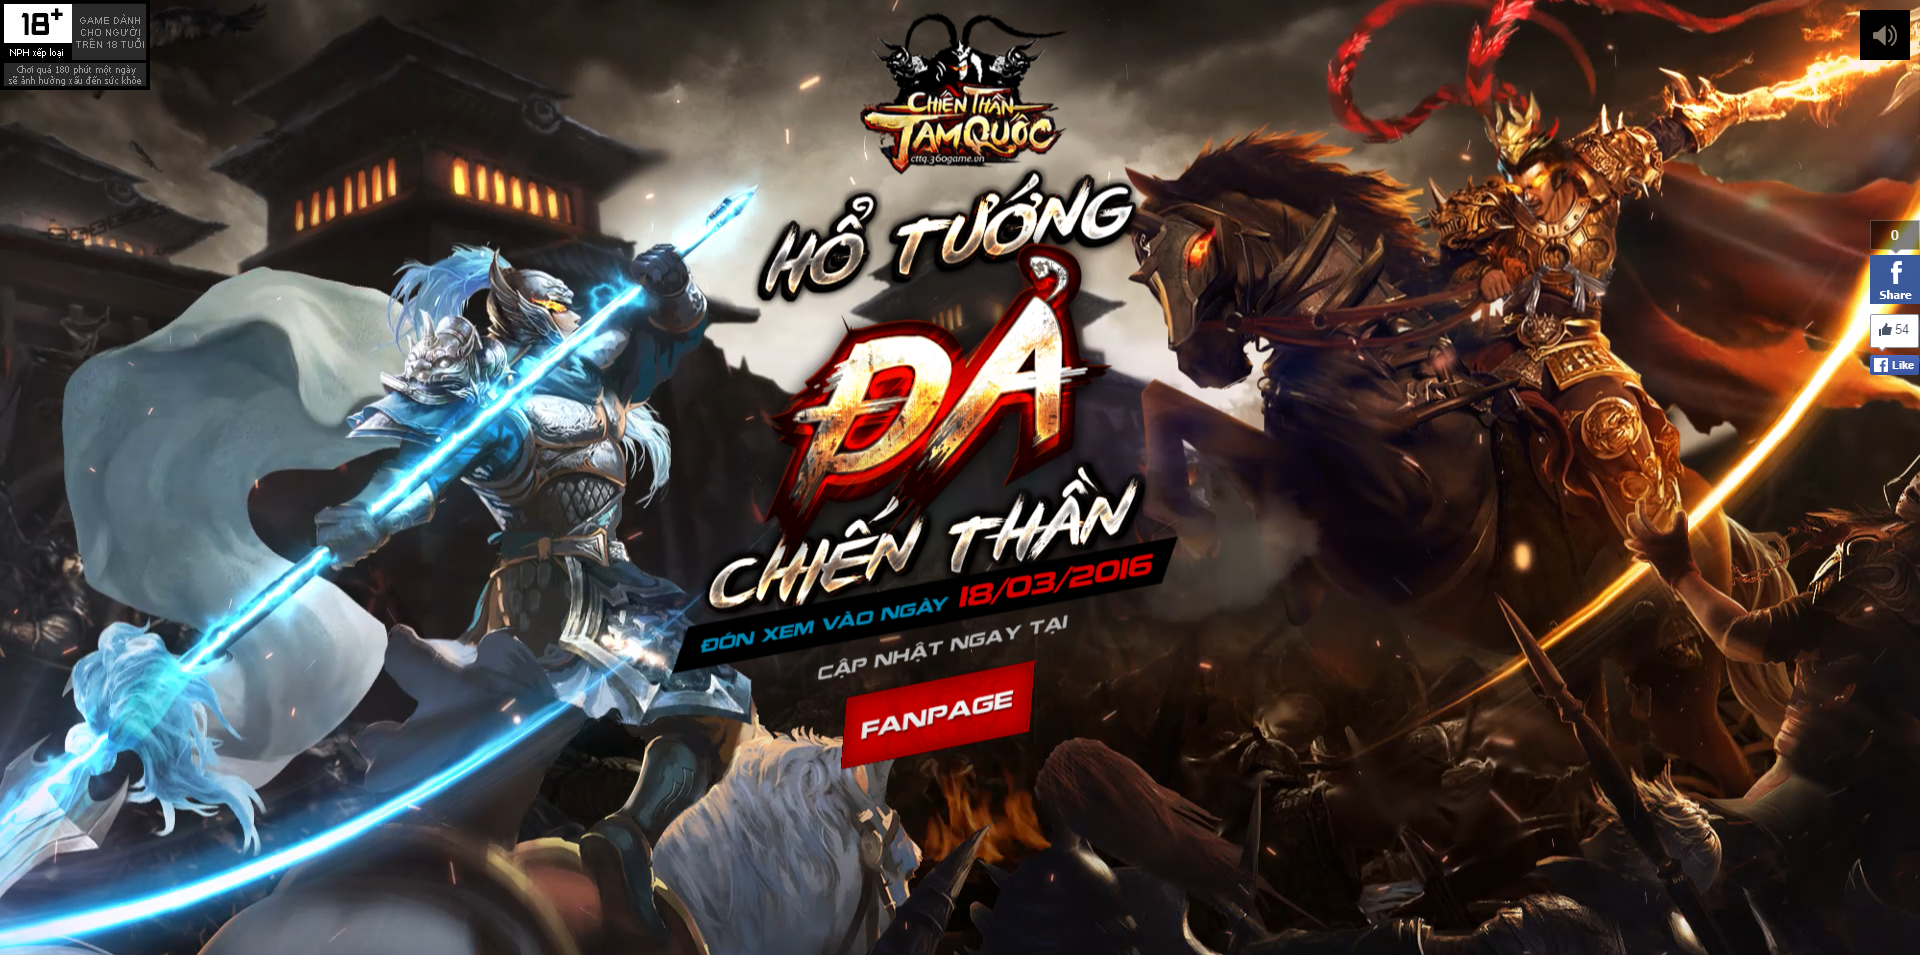 2game_chien_than_tam_quoc_ra_teaser_2(1).png (1920×955)